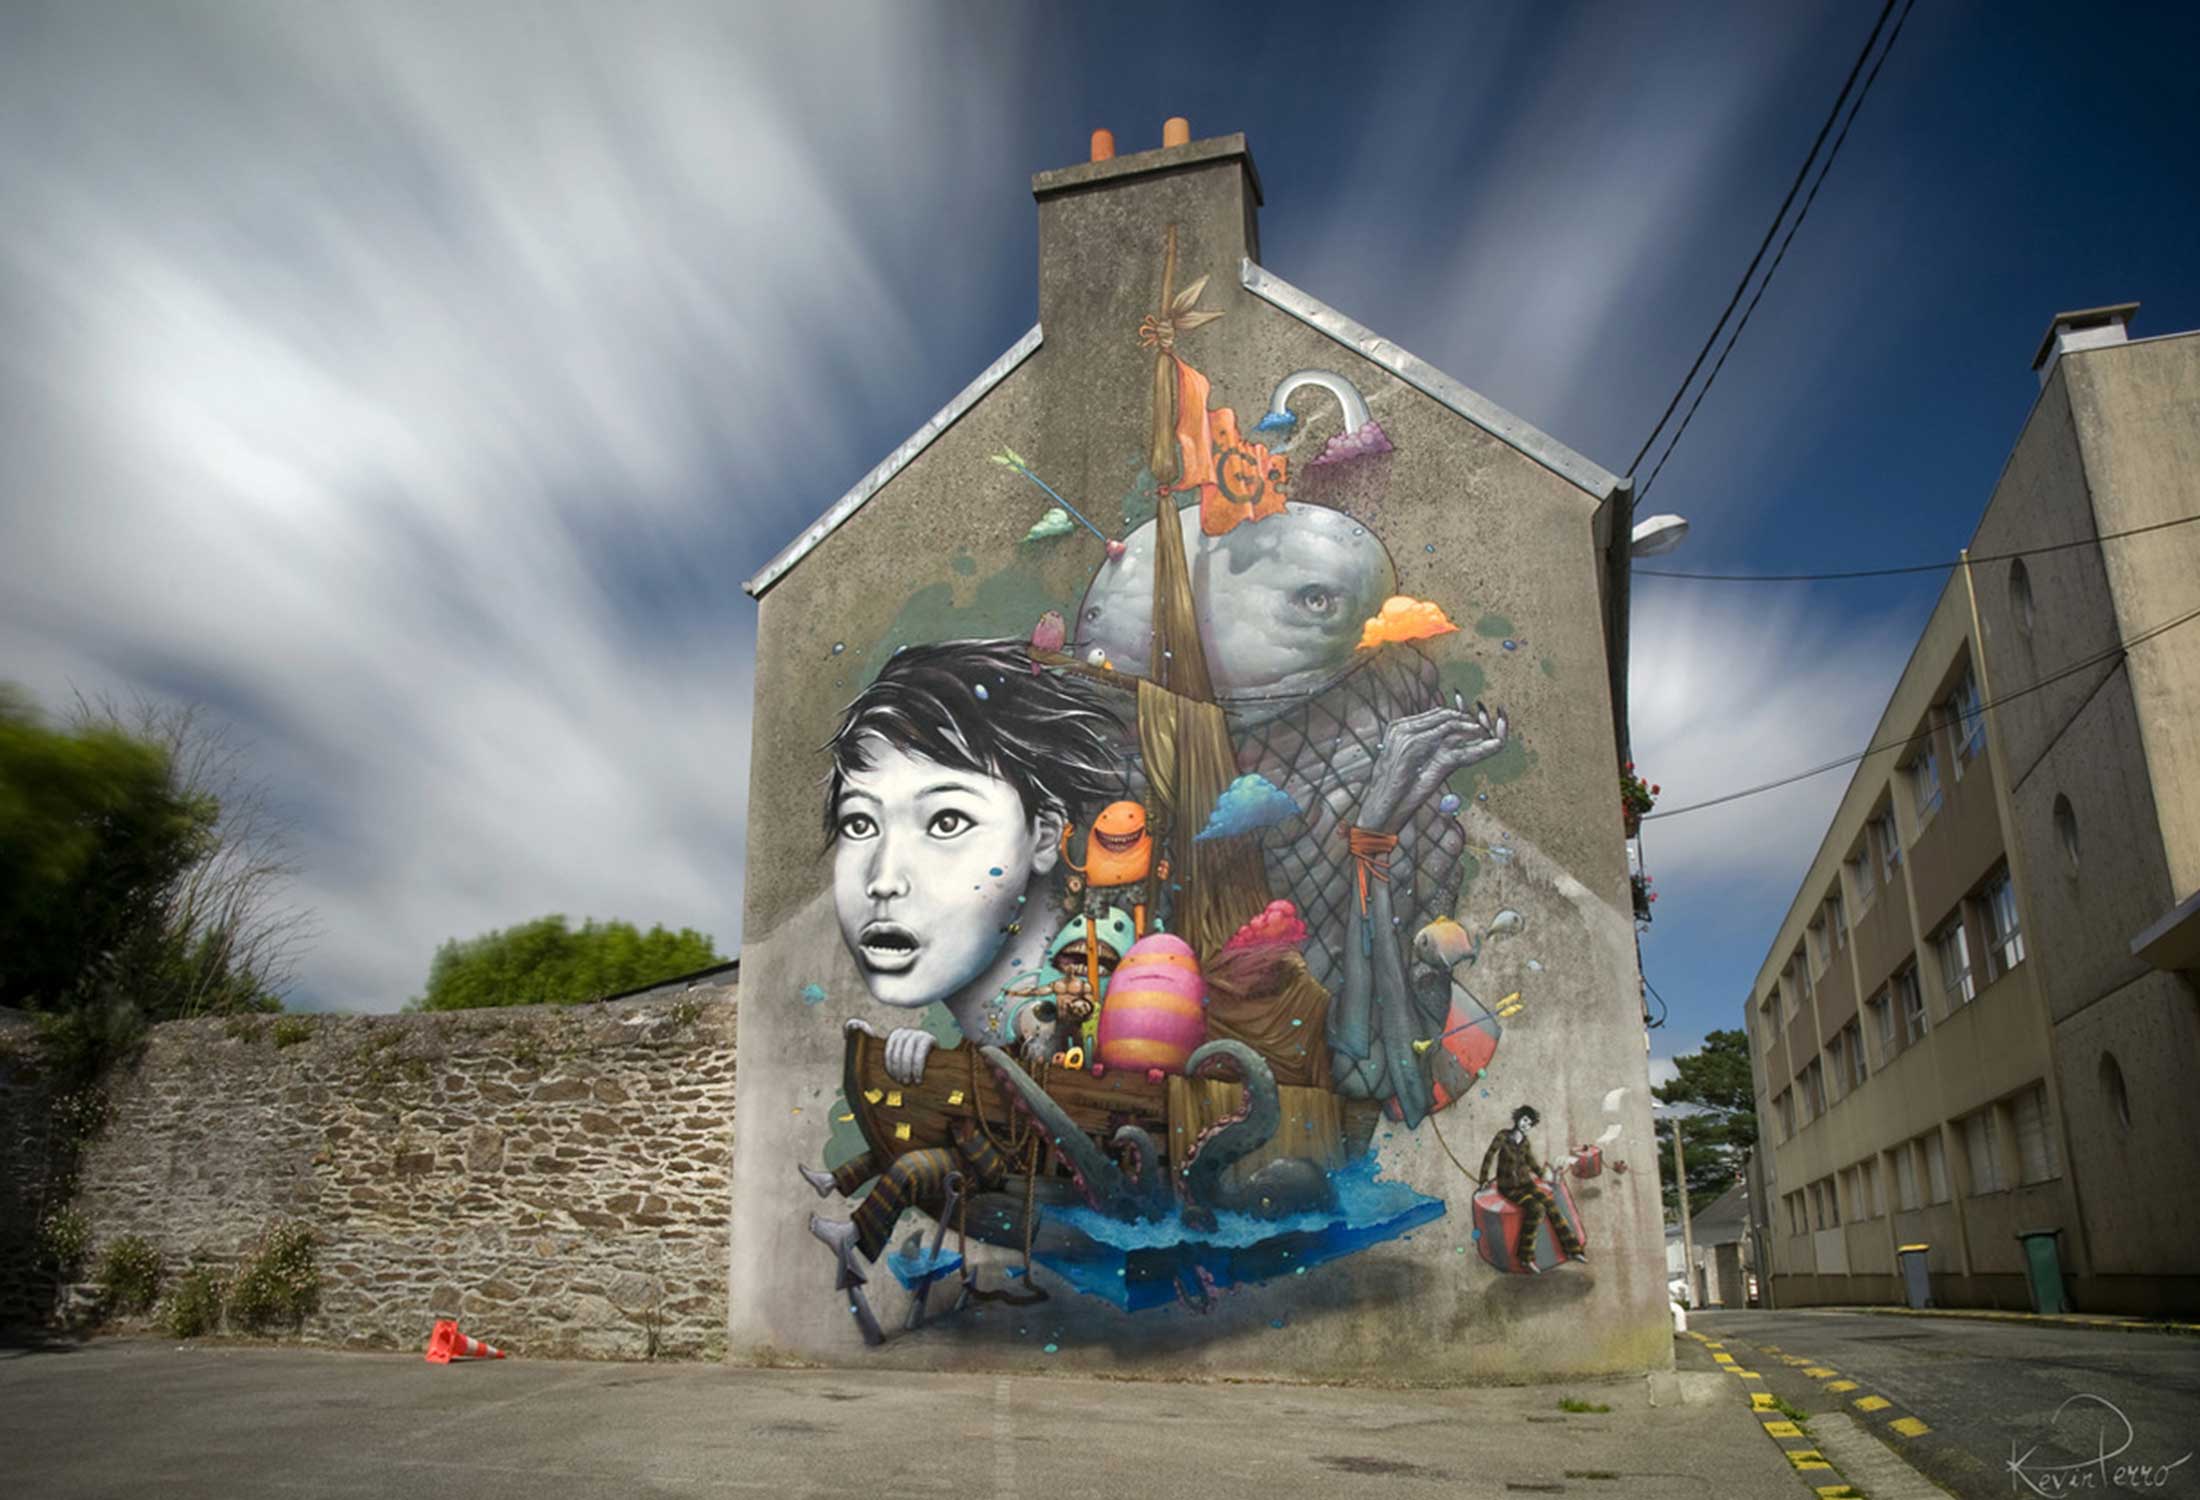 La Pêche Miraculeuse by Liliwenn and Bom. K is an enchanting and memorable mural with vibrant and beautiful colors.